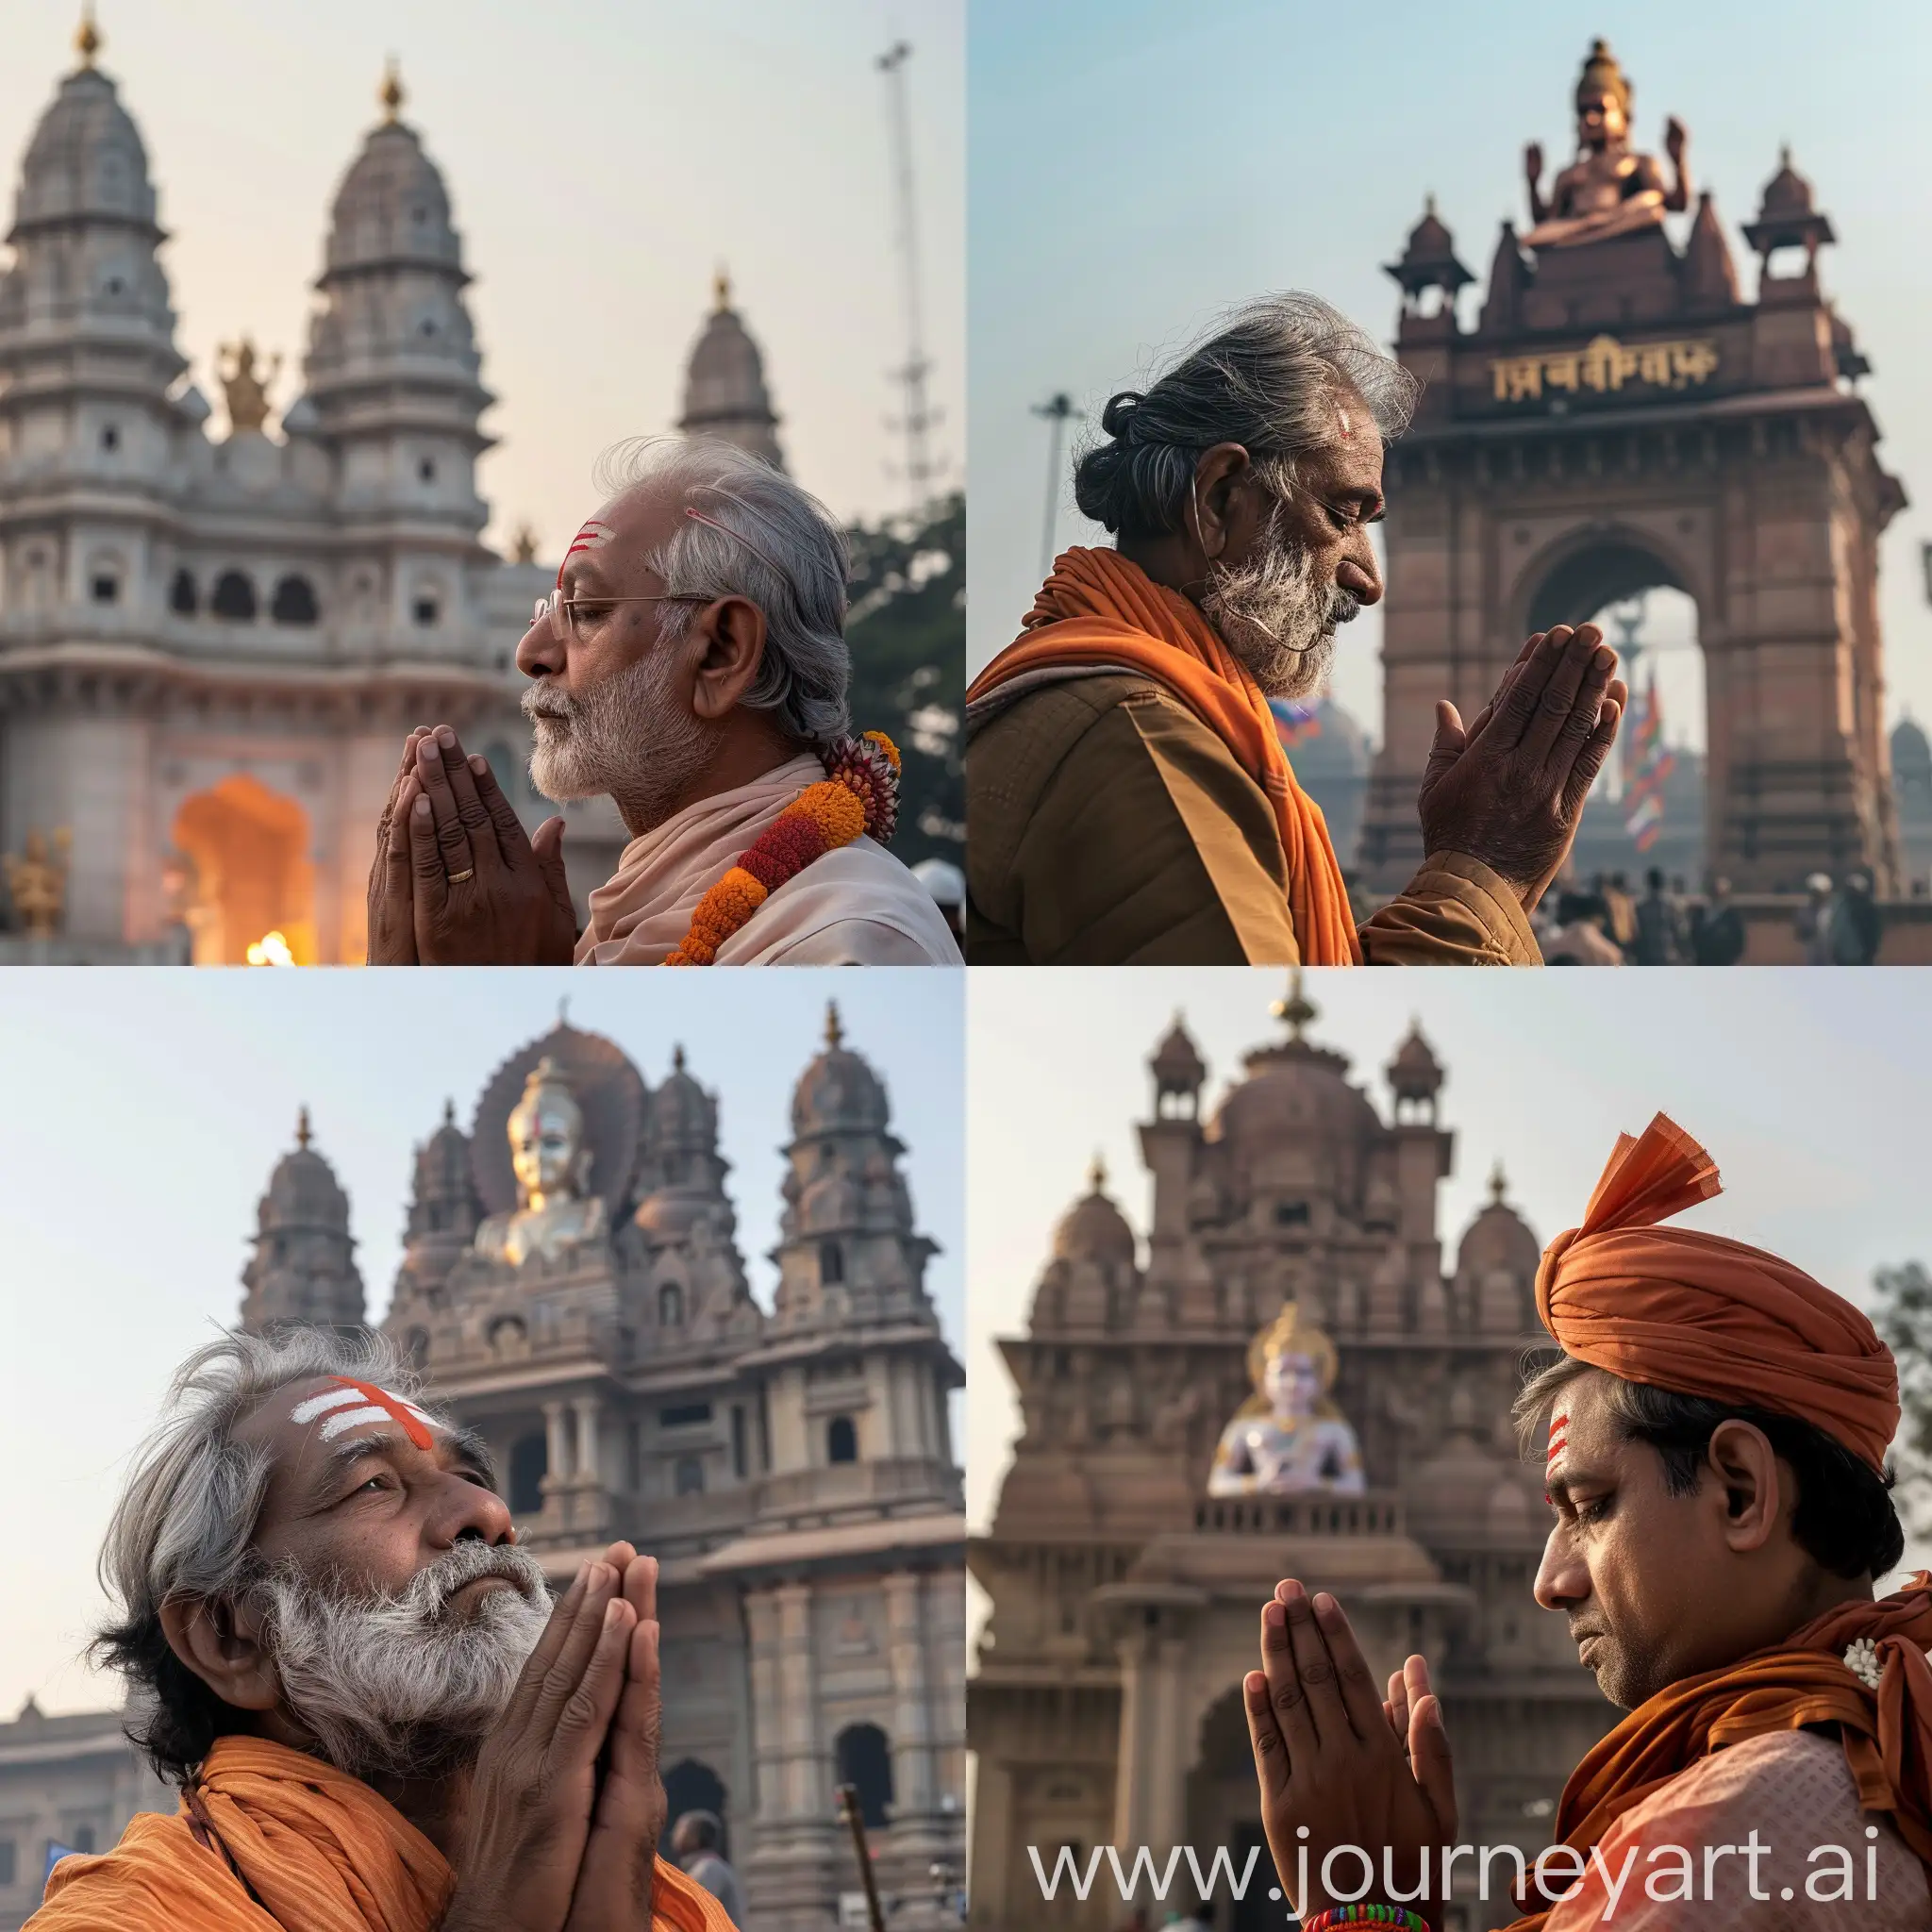 RSS-of-India-Praying-with-Ayodhya-Rama-Statue-Background